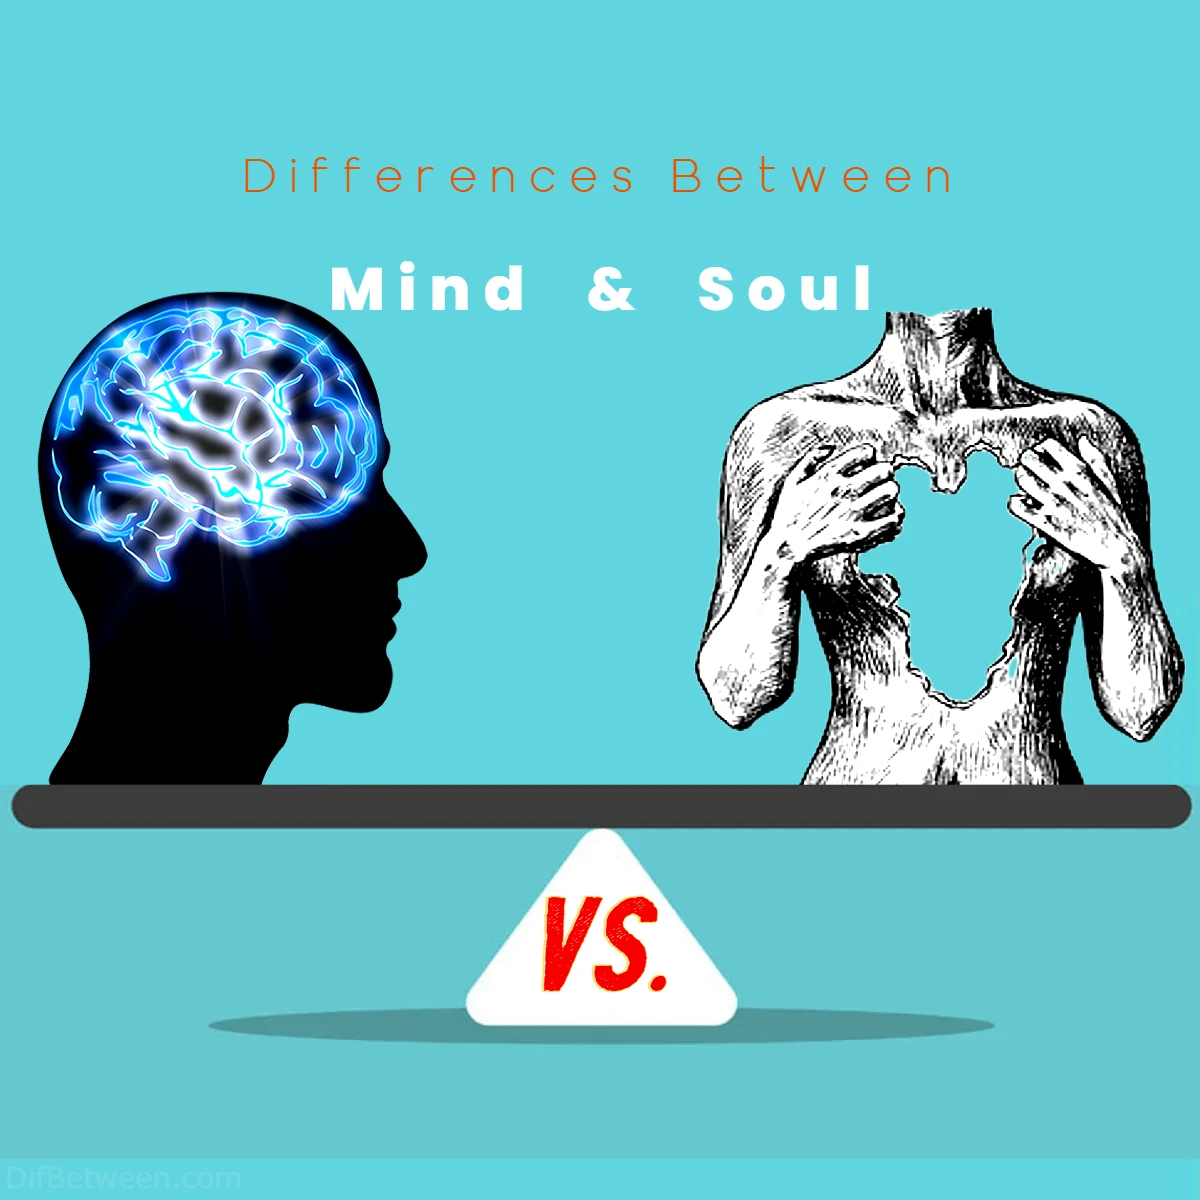 Differences Between Mind vs Soul